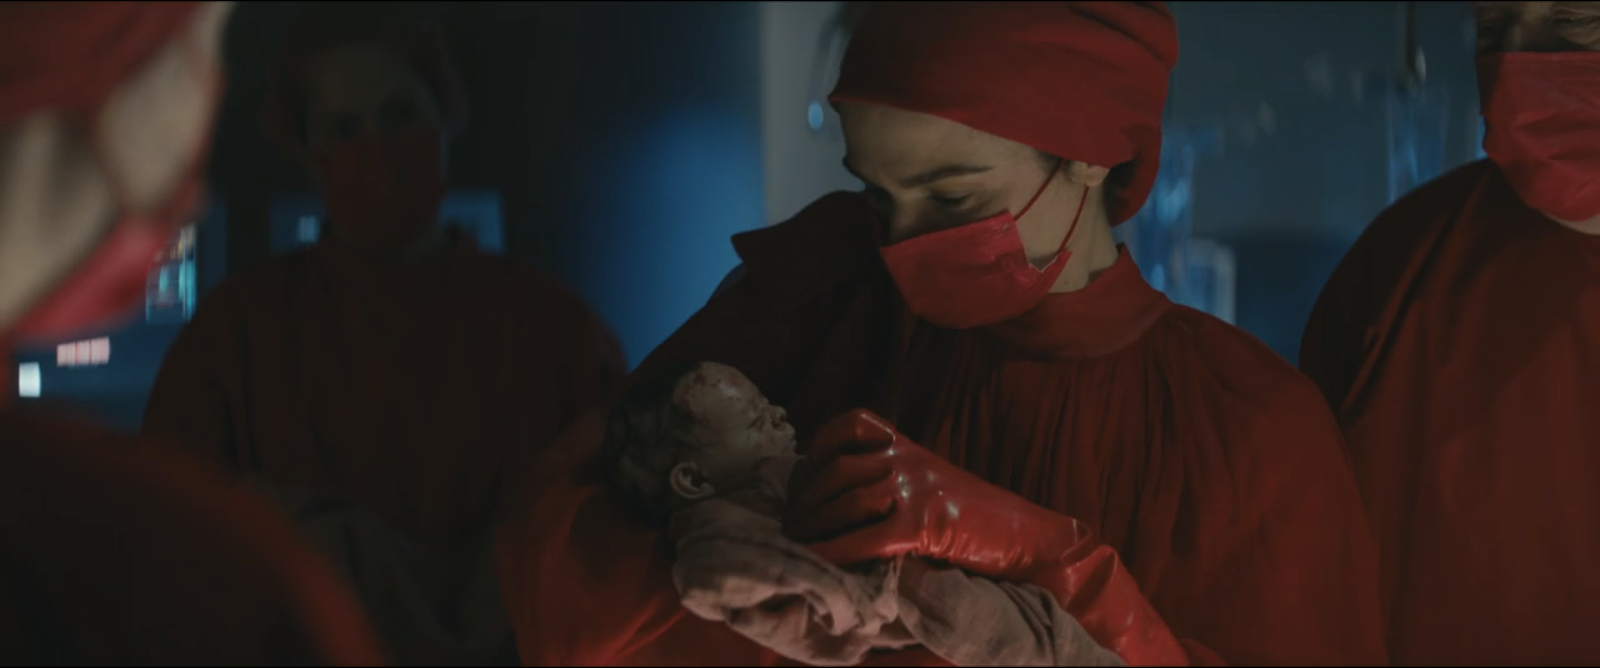 Image of doctor all in red holding newborn baby